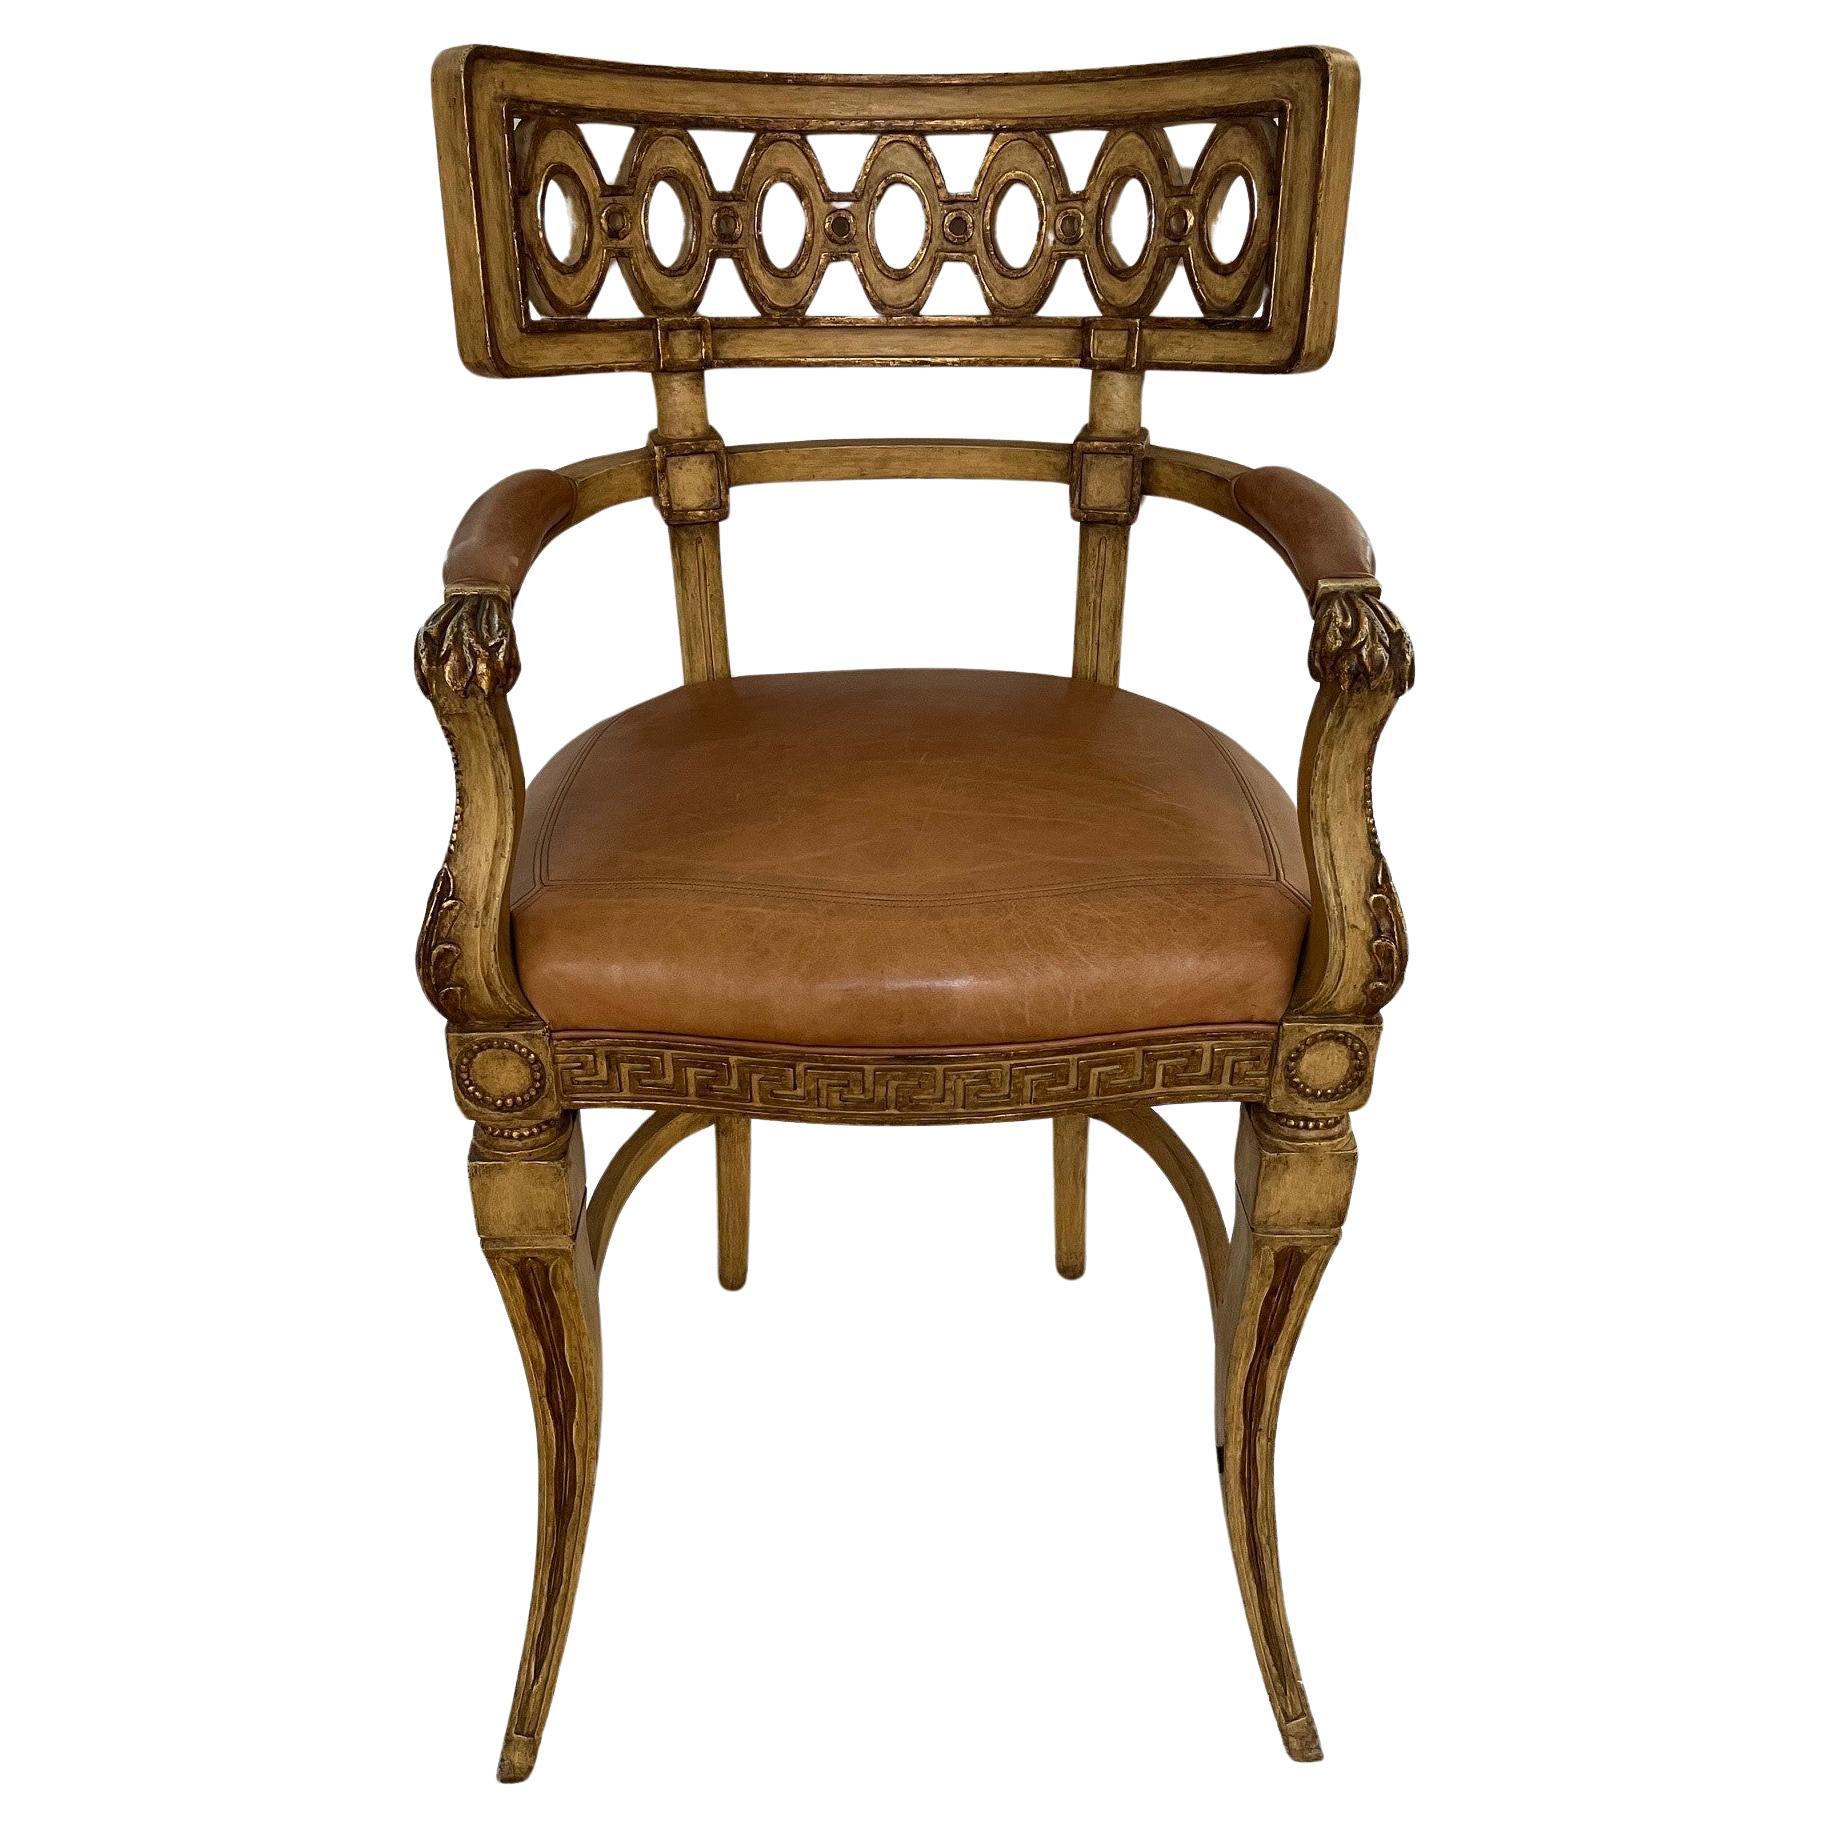 Made to Order Venetian Bar Stool in Antique Painted Finish with Gilded Detail For Sale